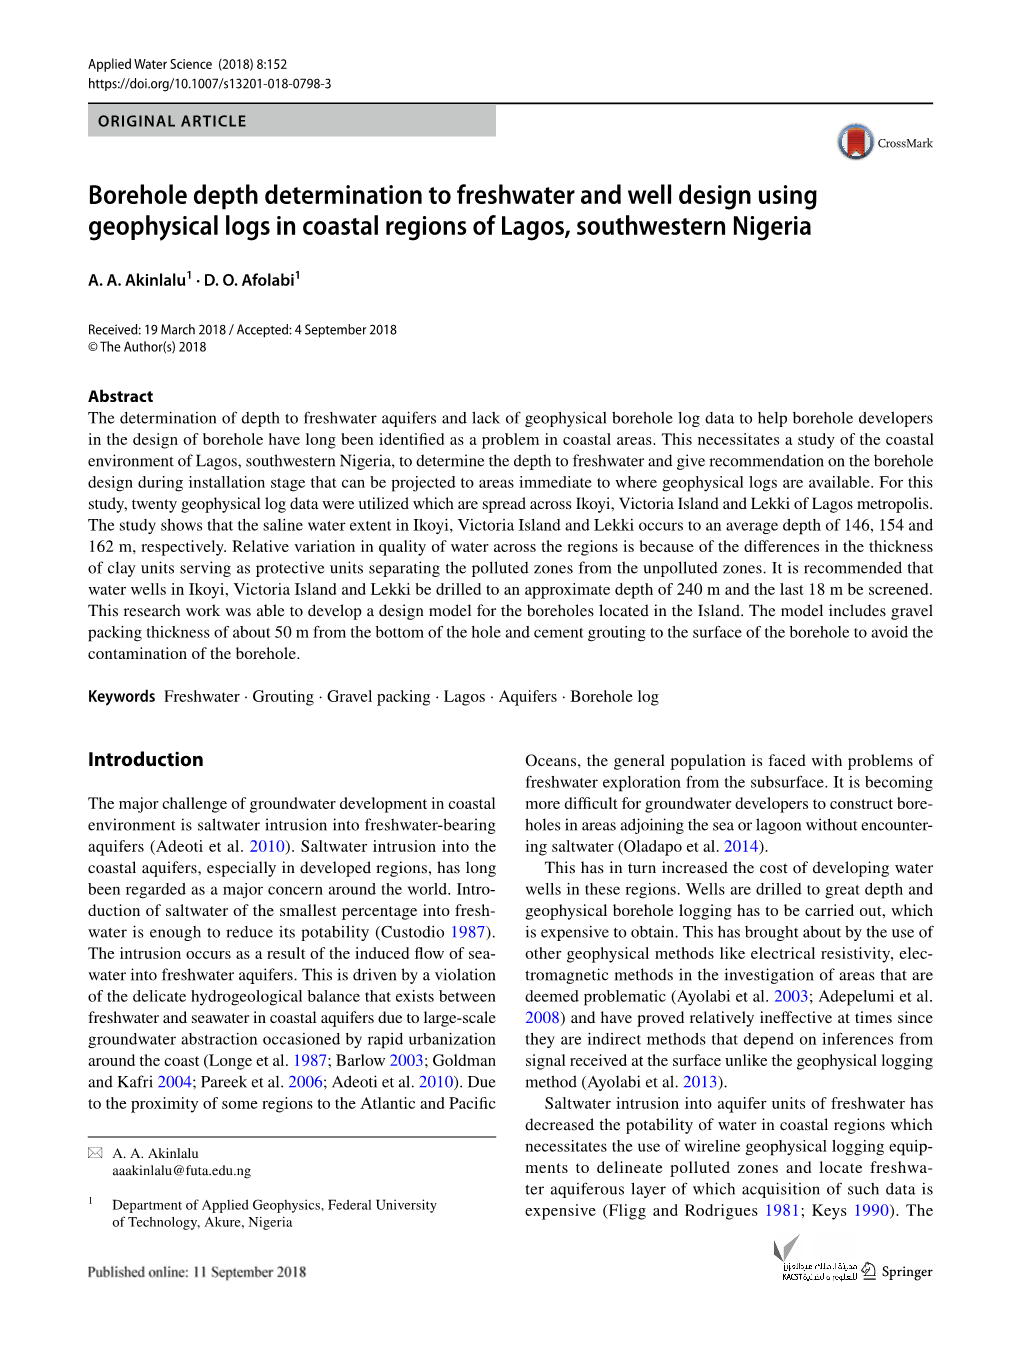 Borehole Depth Determination to Freshwater and Well Design Using Geophysical Logs in Coastal Regions of Lagos, Southwestern Nigeria